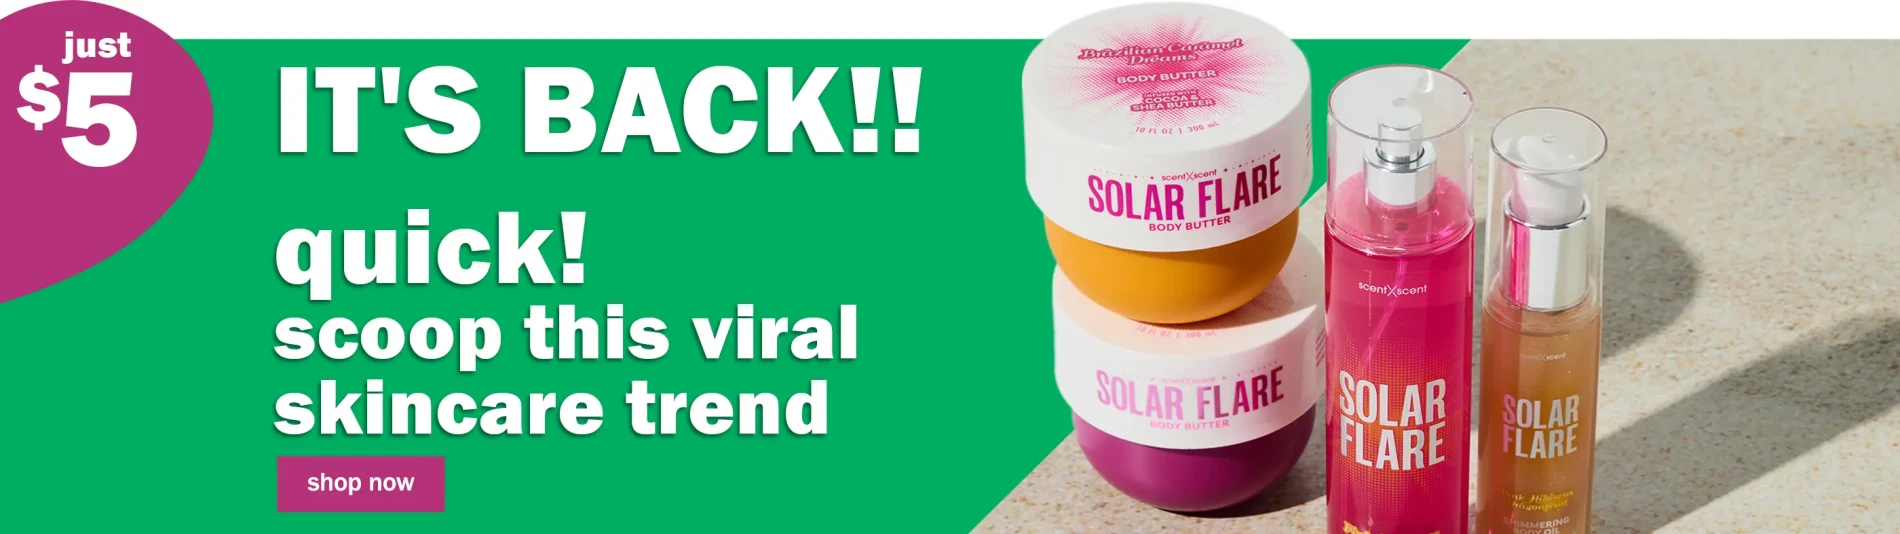 Just $5. It's Back!! Quick! Scoop this viral skincare trend. Shop Now.